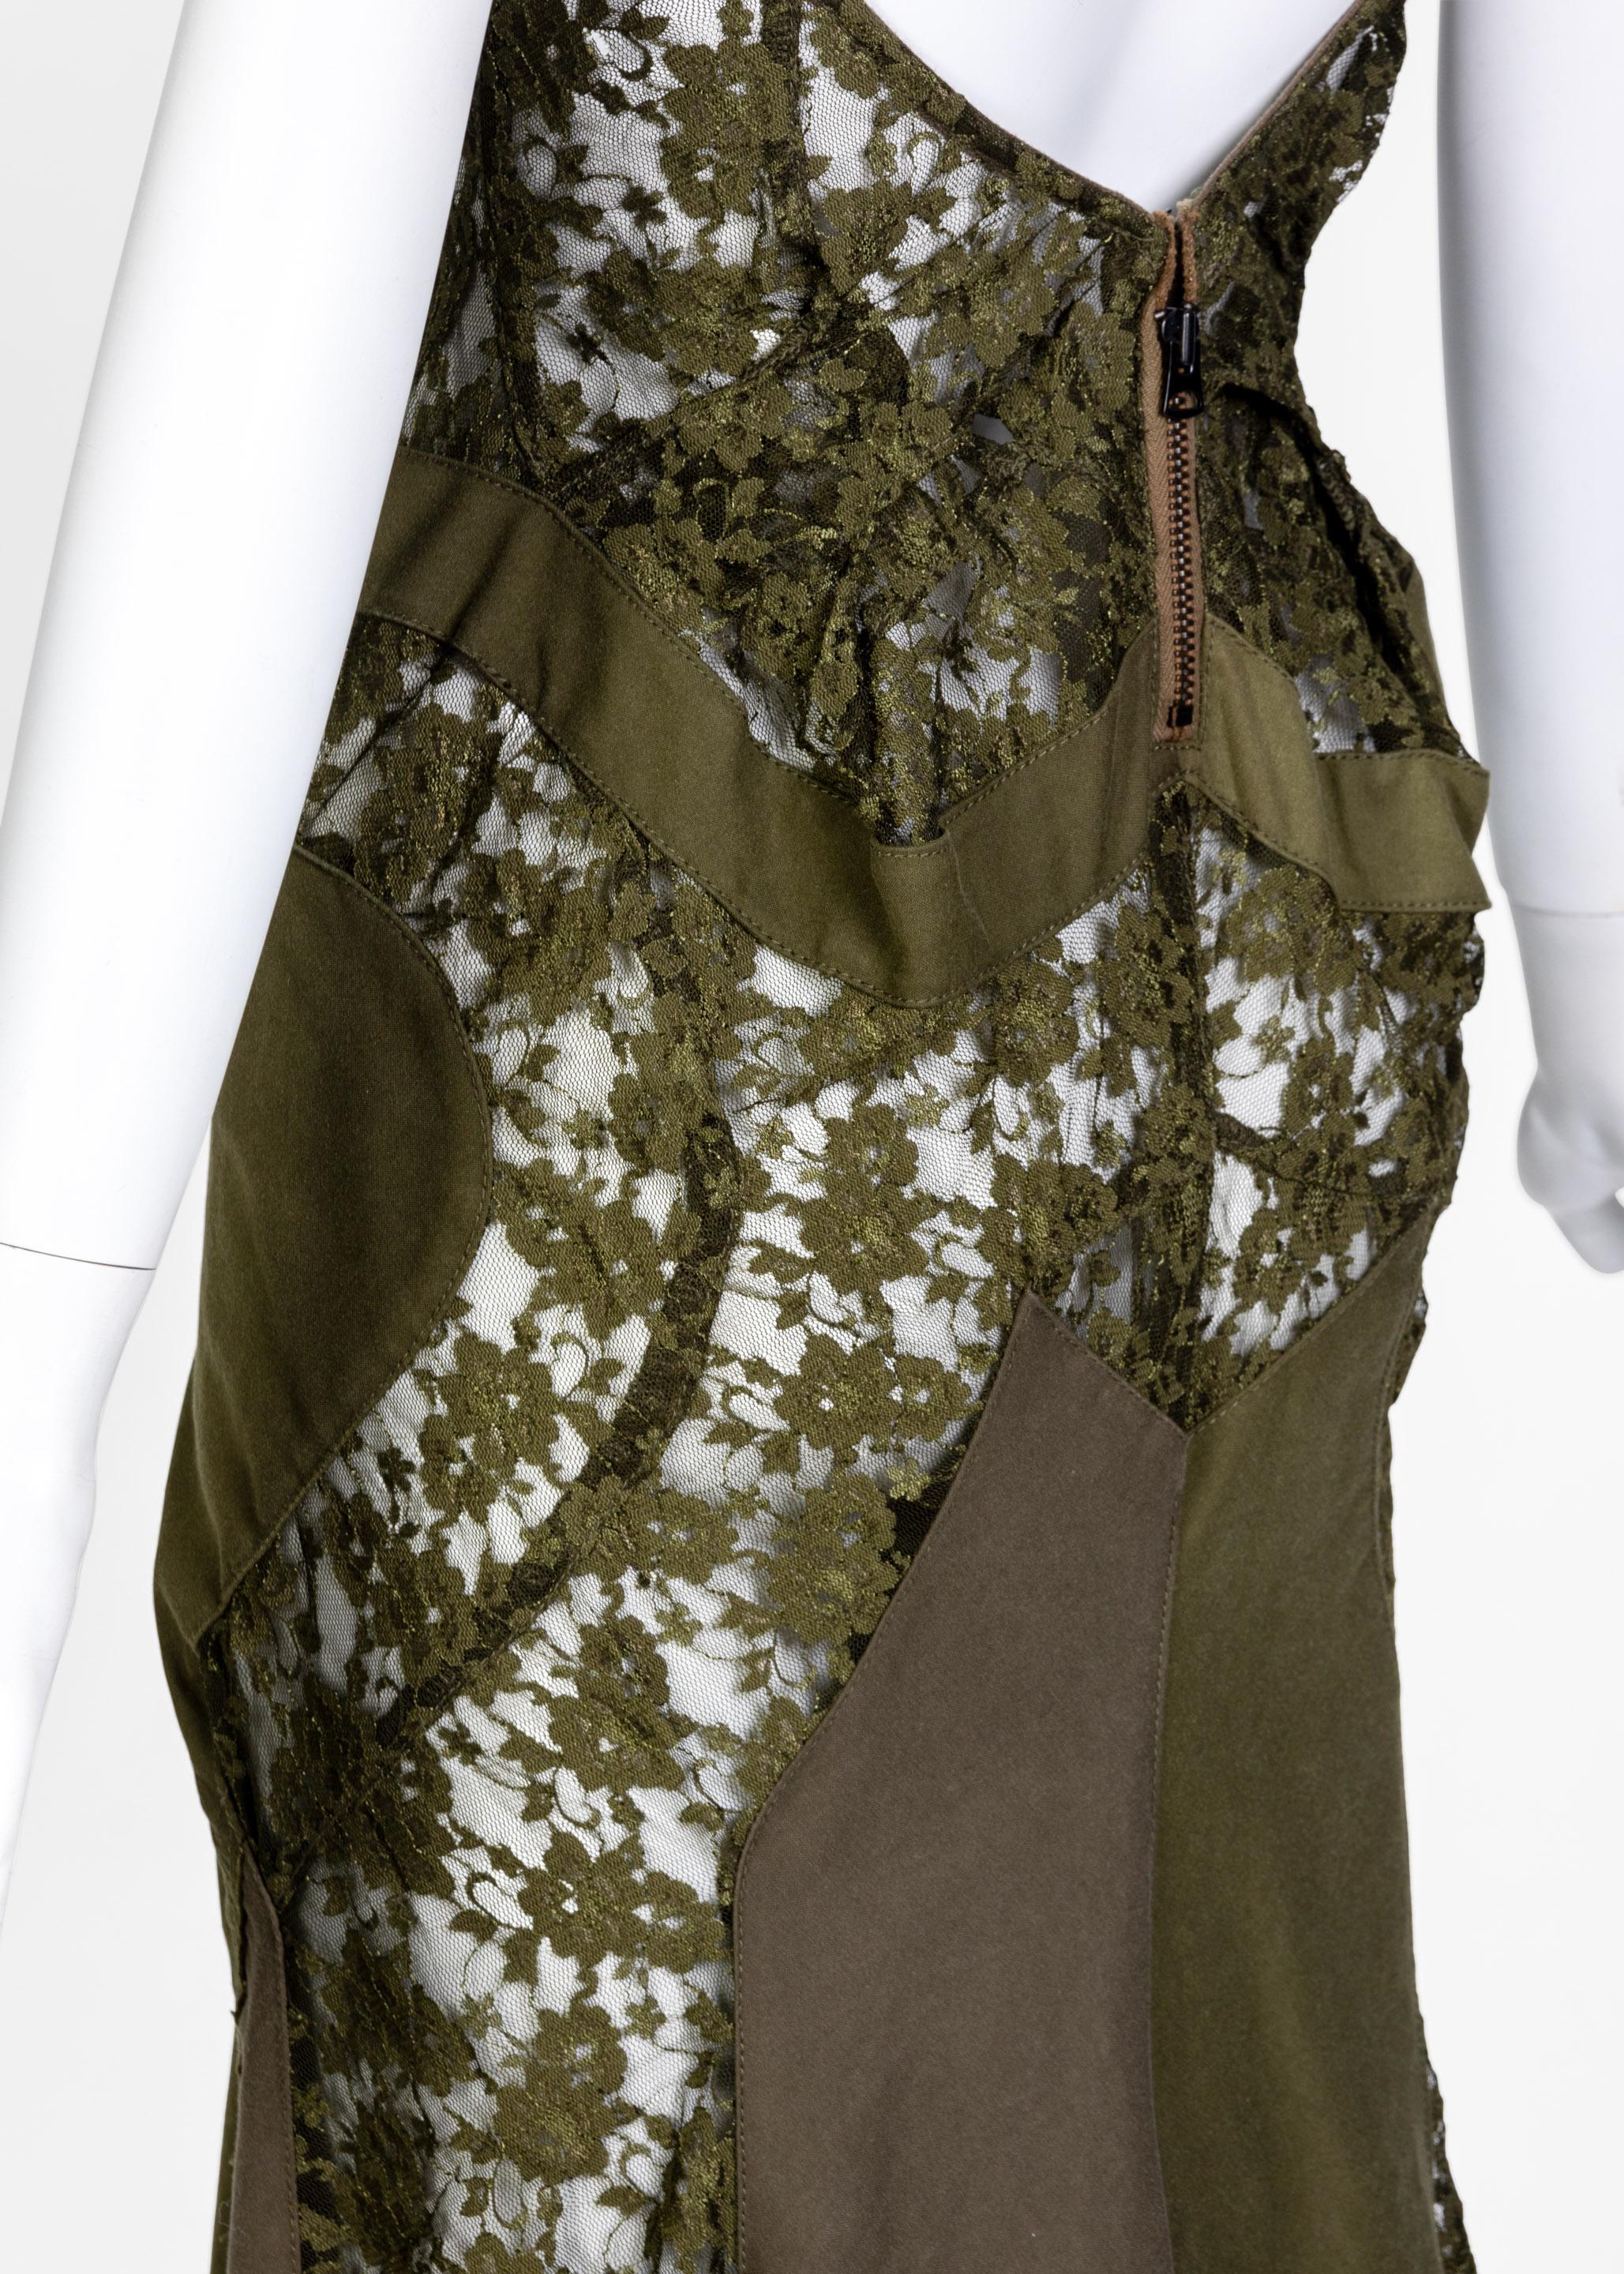 Junya Watanabe Comme des Garcons Green Sleeveless Lace Patch-Work Dress, 2006 For Sale 4